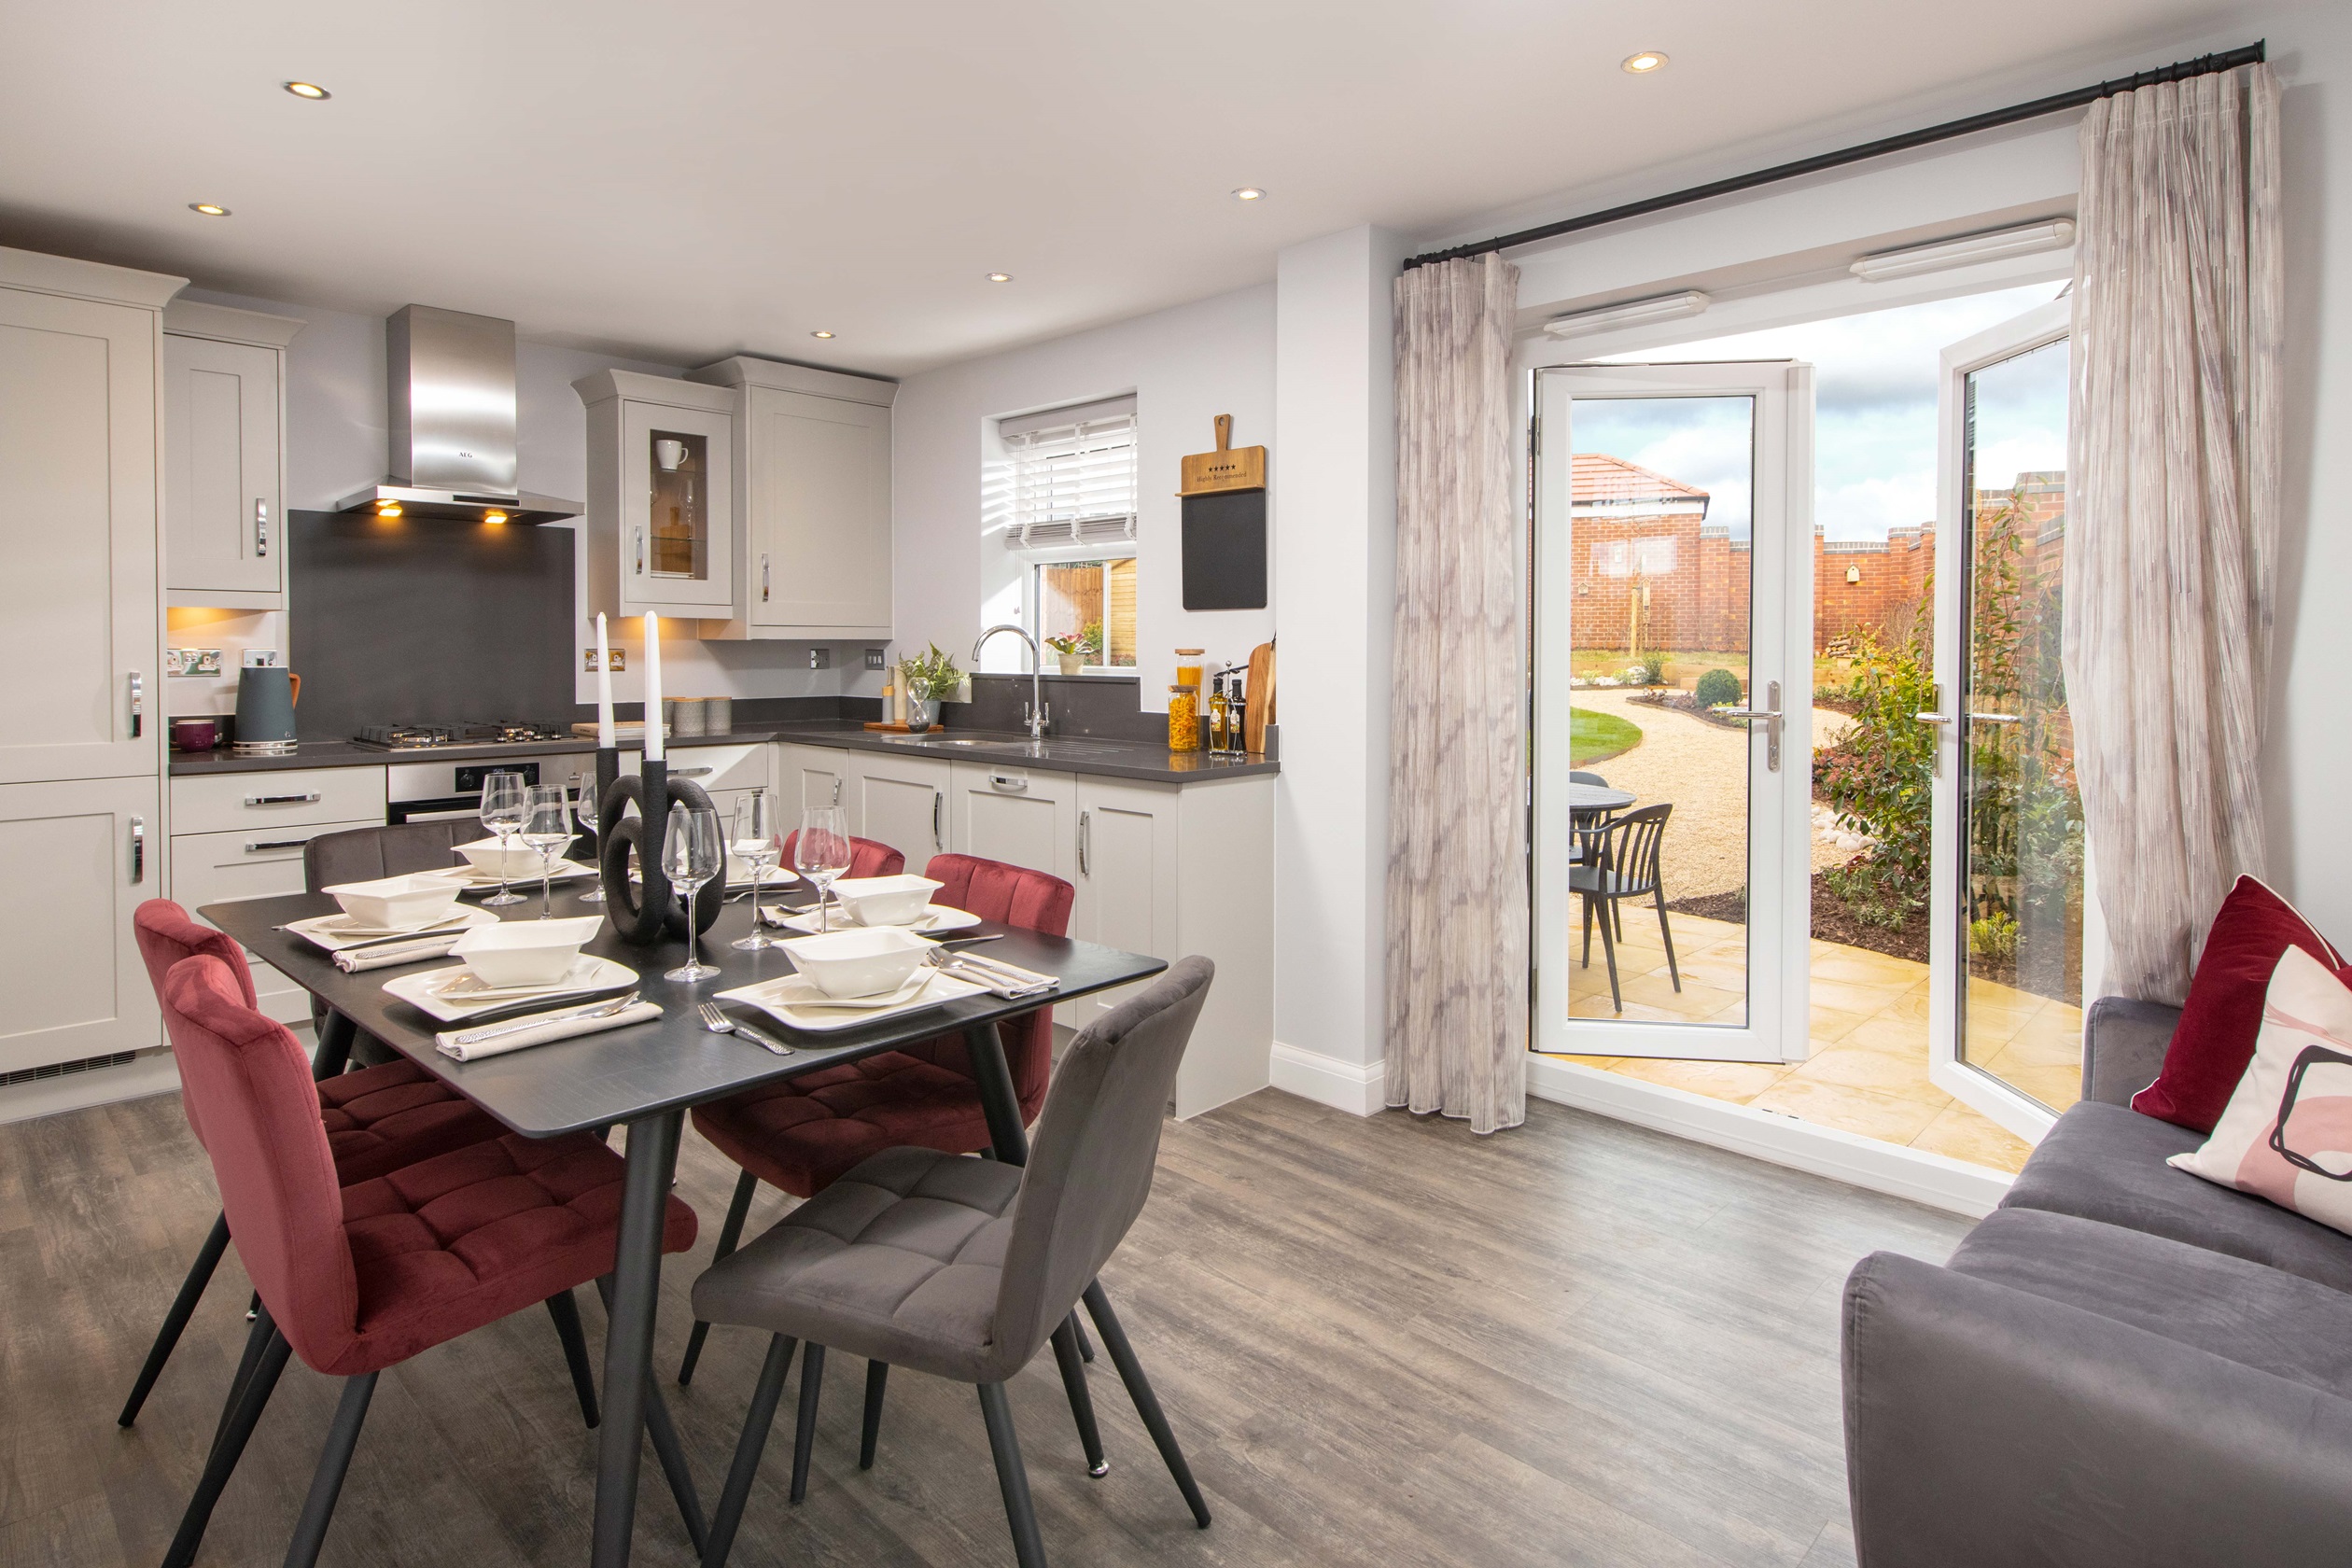 Property 3 of 10. Hadley Kitchen-Diner With French Doors